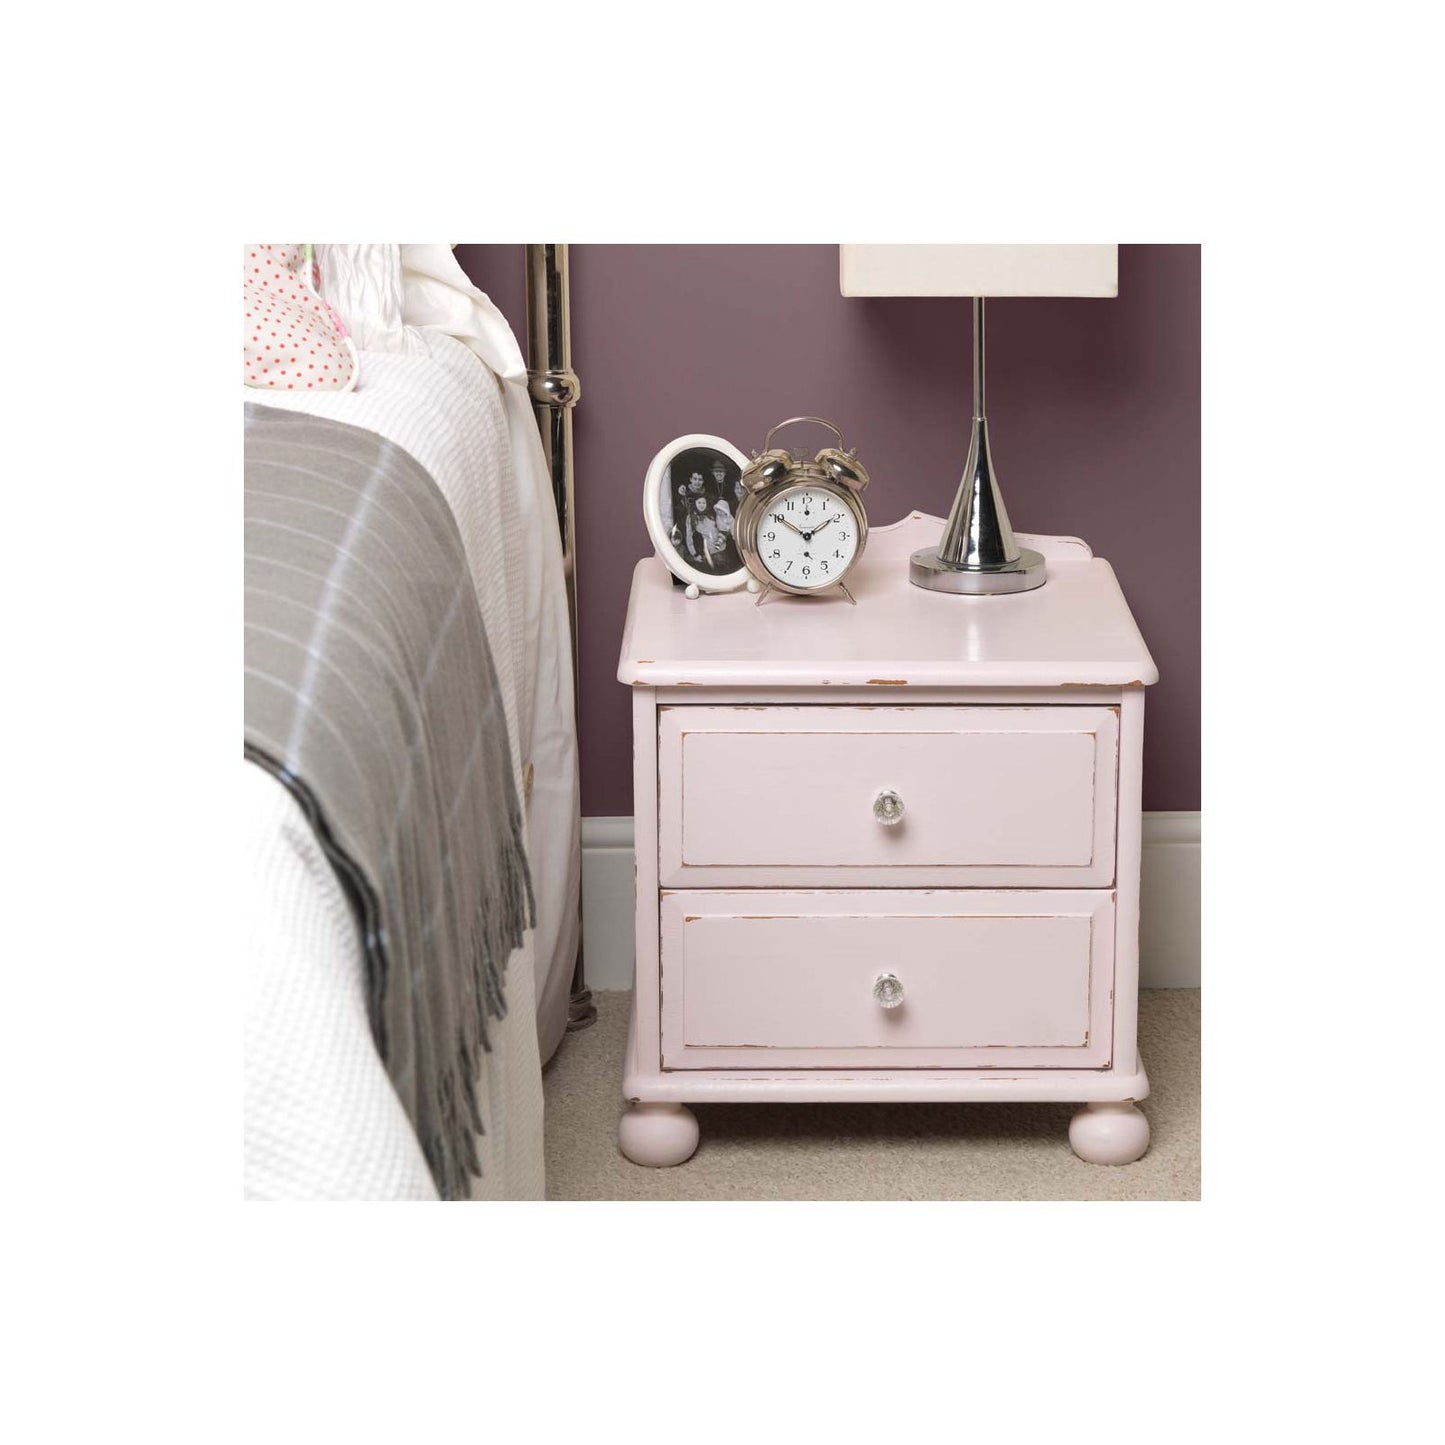 Rust-Oleum Chalky Finish Furniture Paint China Rose